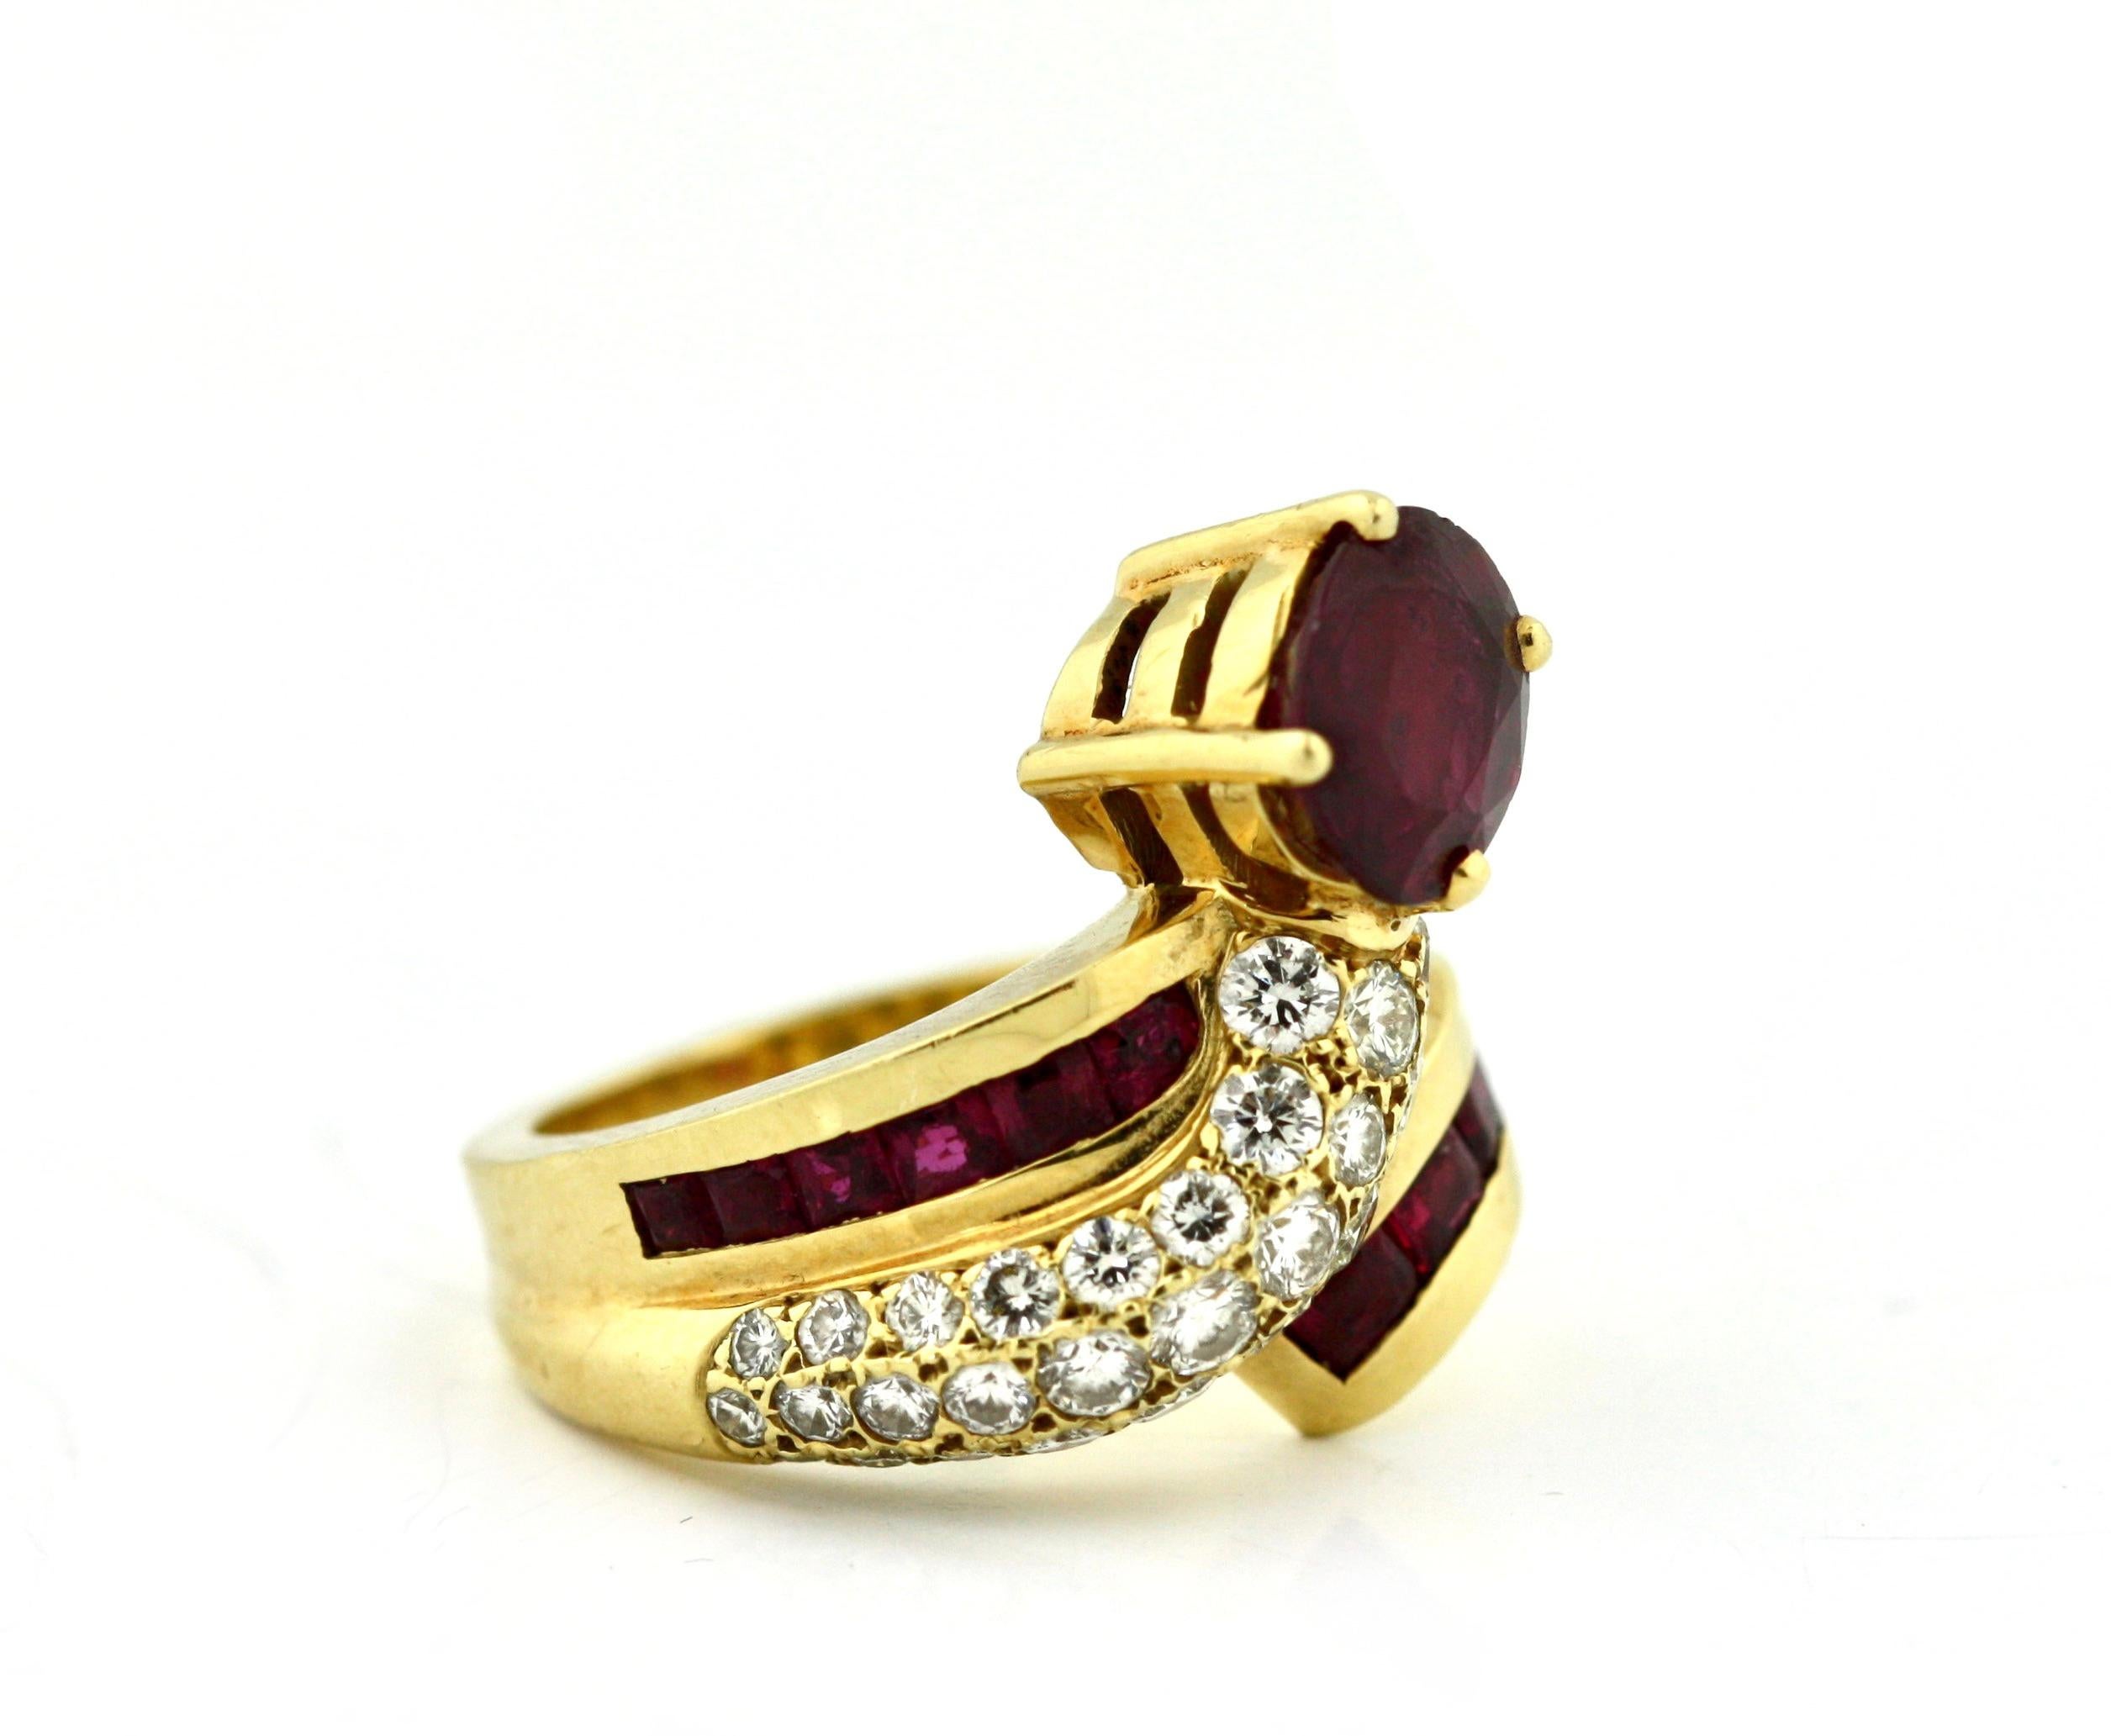 
Ruby and Diamond Ring
Of stylized toi et moi design, set with a oval-shaped ruby weighing approximately 2.32 carats and 27 round cut diamonds weighing approximately 1.50 carats mounted in 18 karat yellow gold, size 6 1/2.